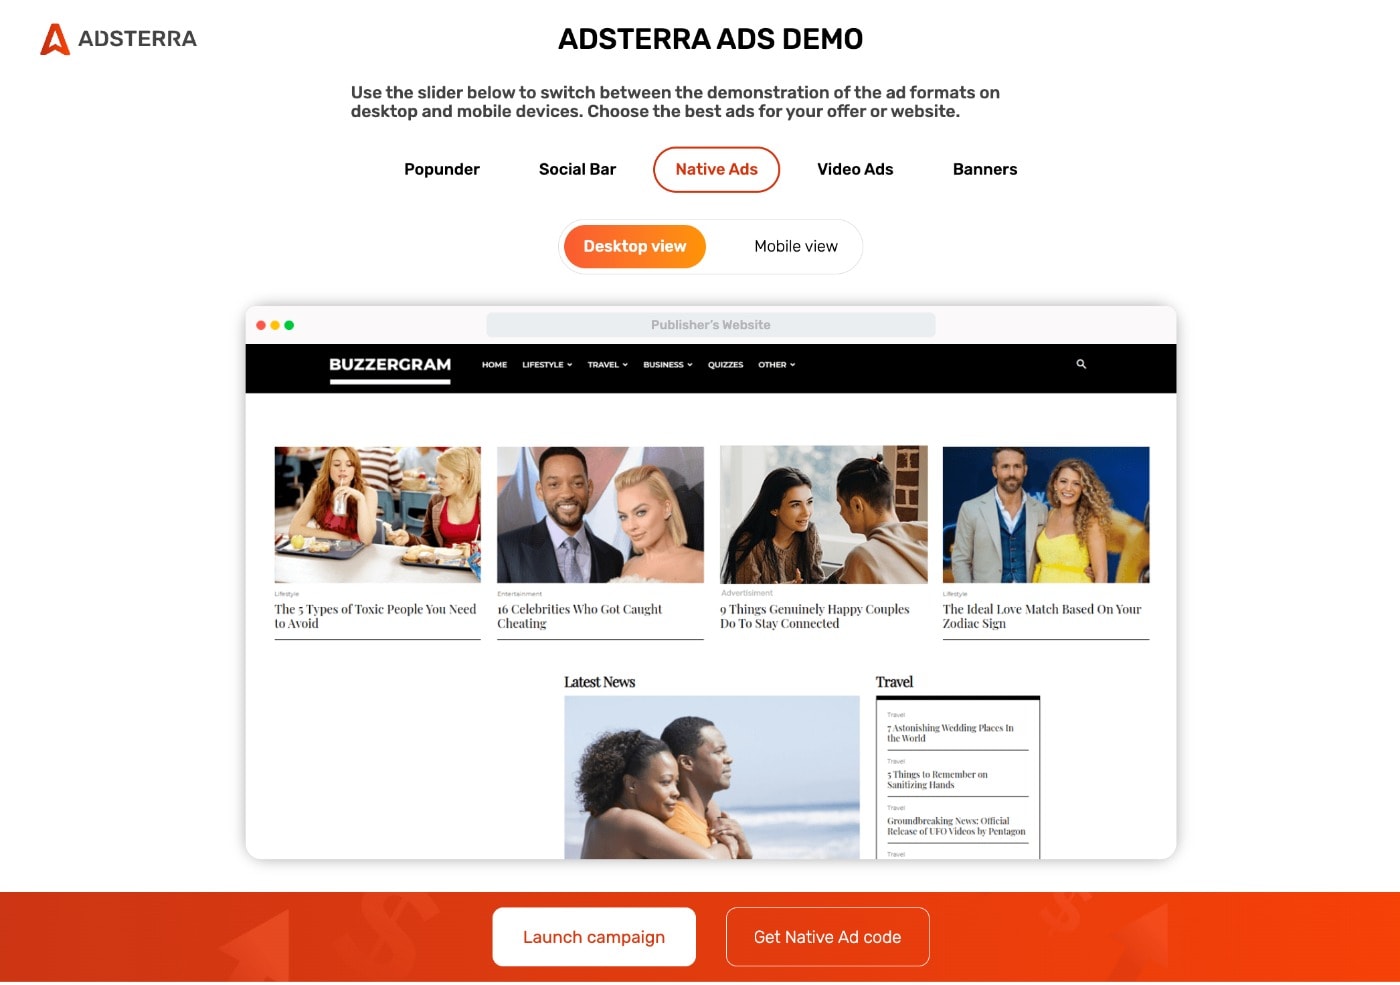 adsterra review - ads formats demo